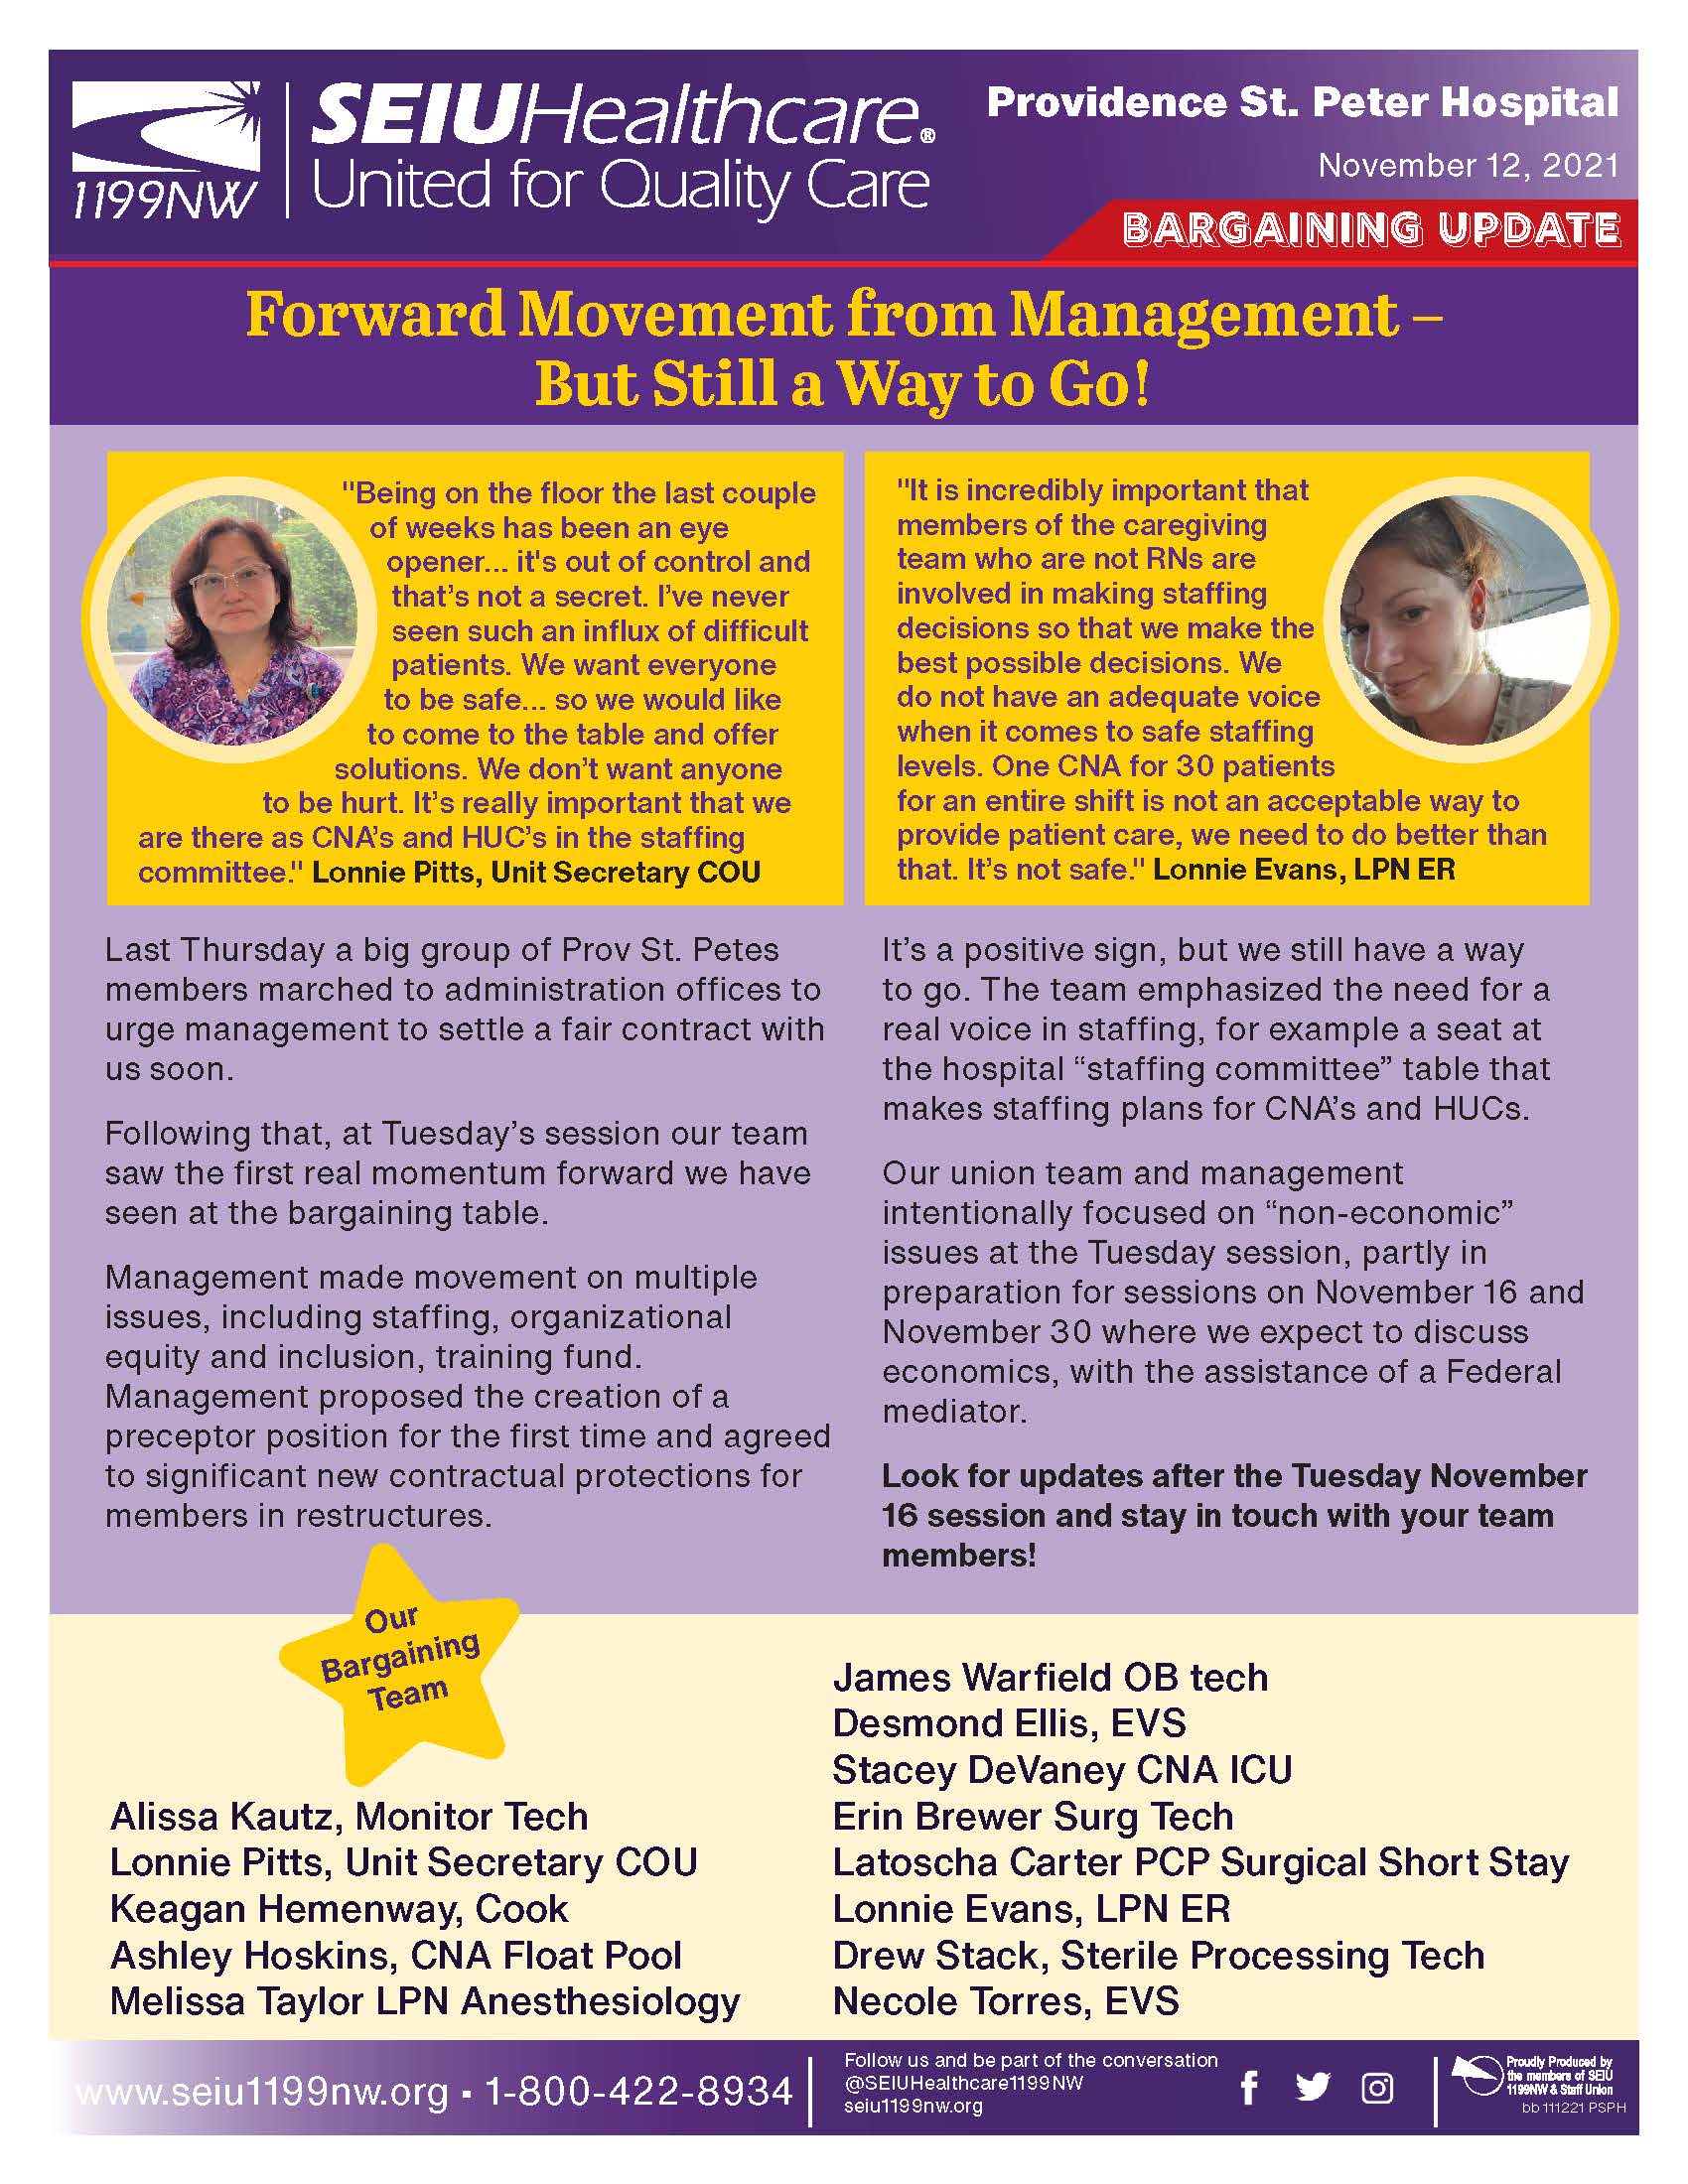 Forward Movement from Management – But Still a Way to Go!